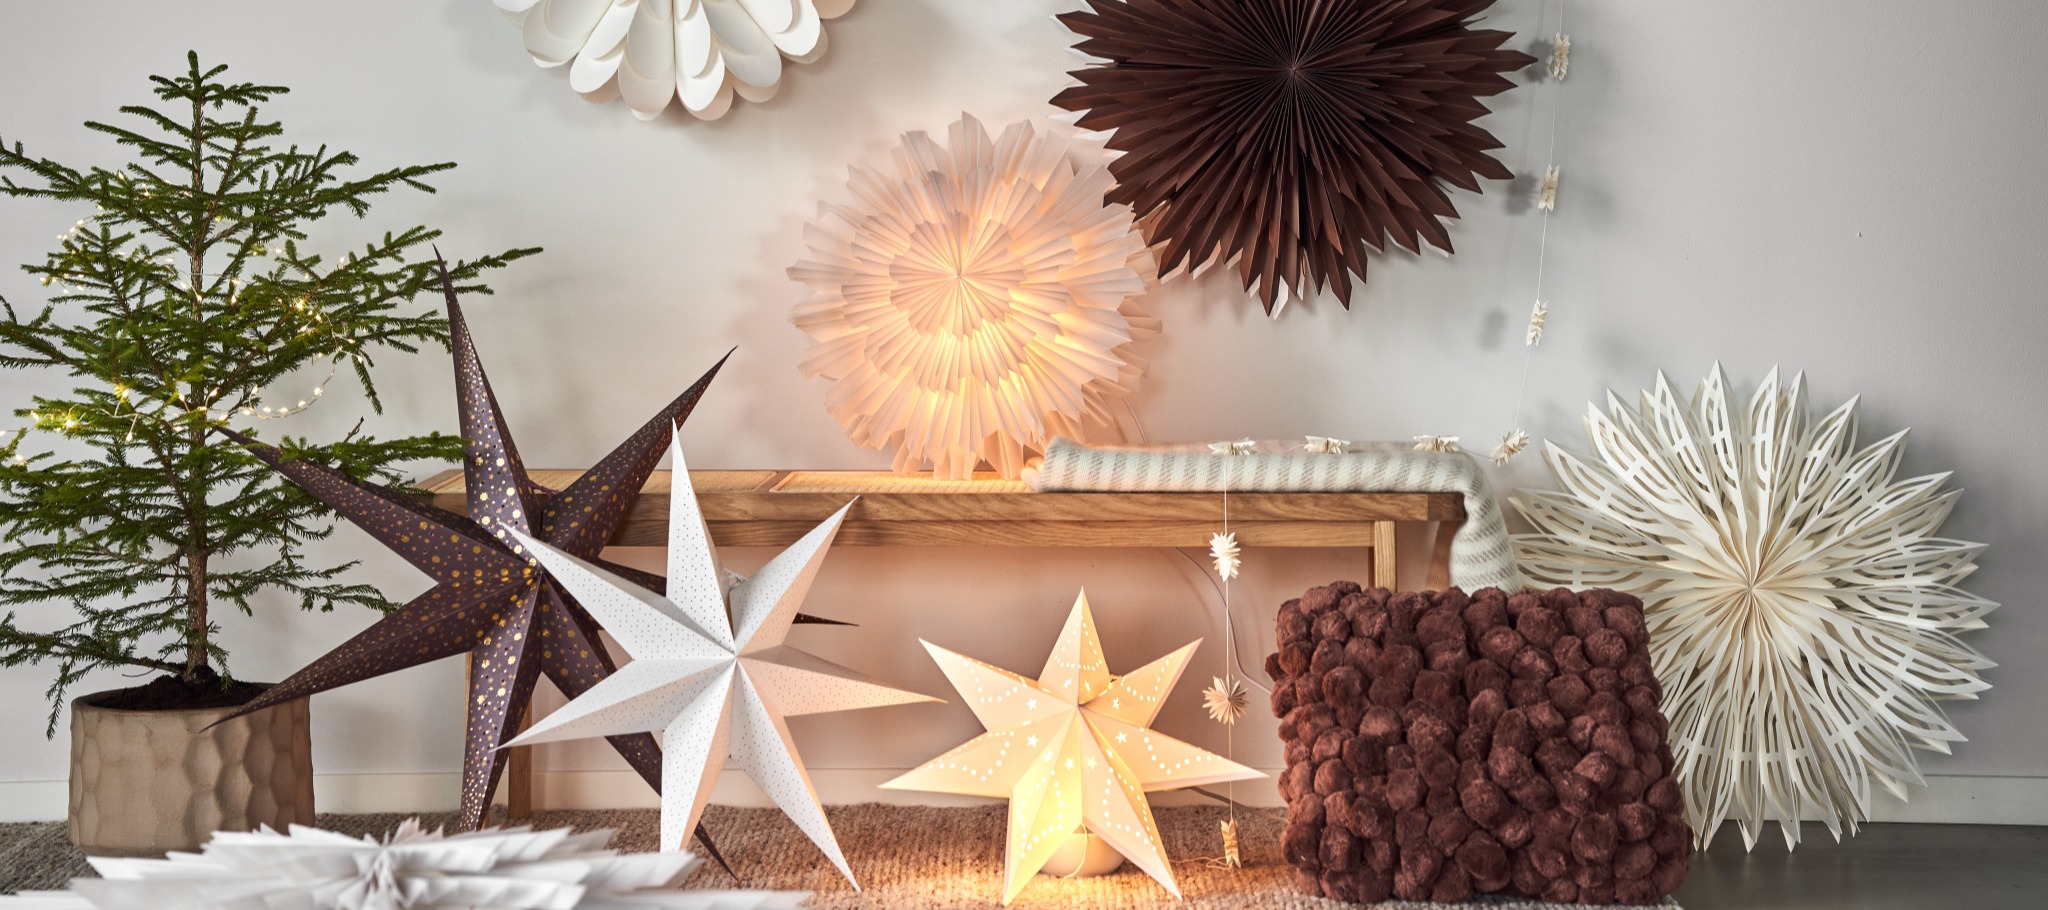 20 Amazing Christmas Decoration Ideas to Make Your Home Instagrammable